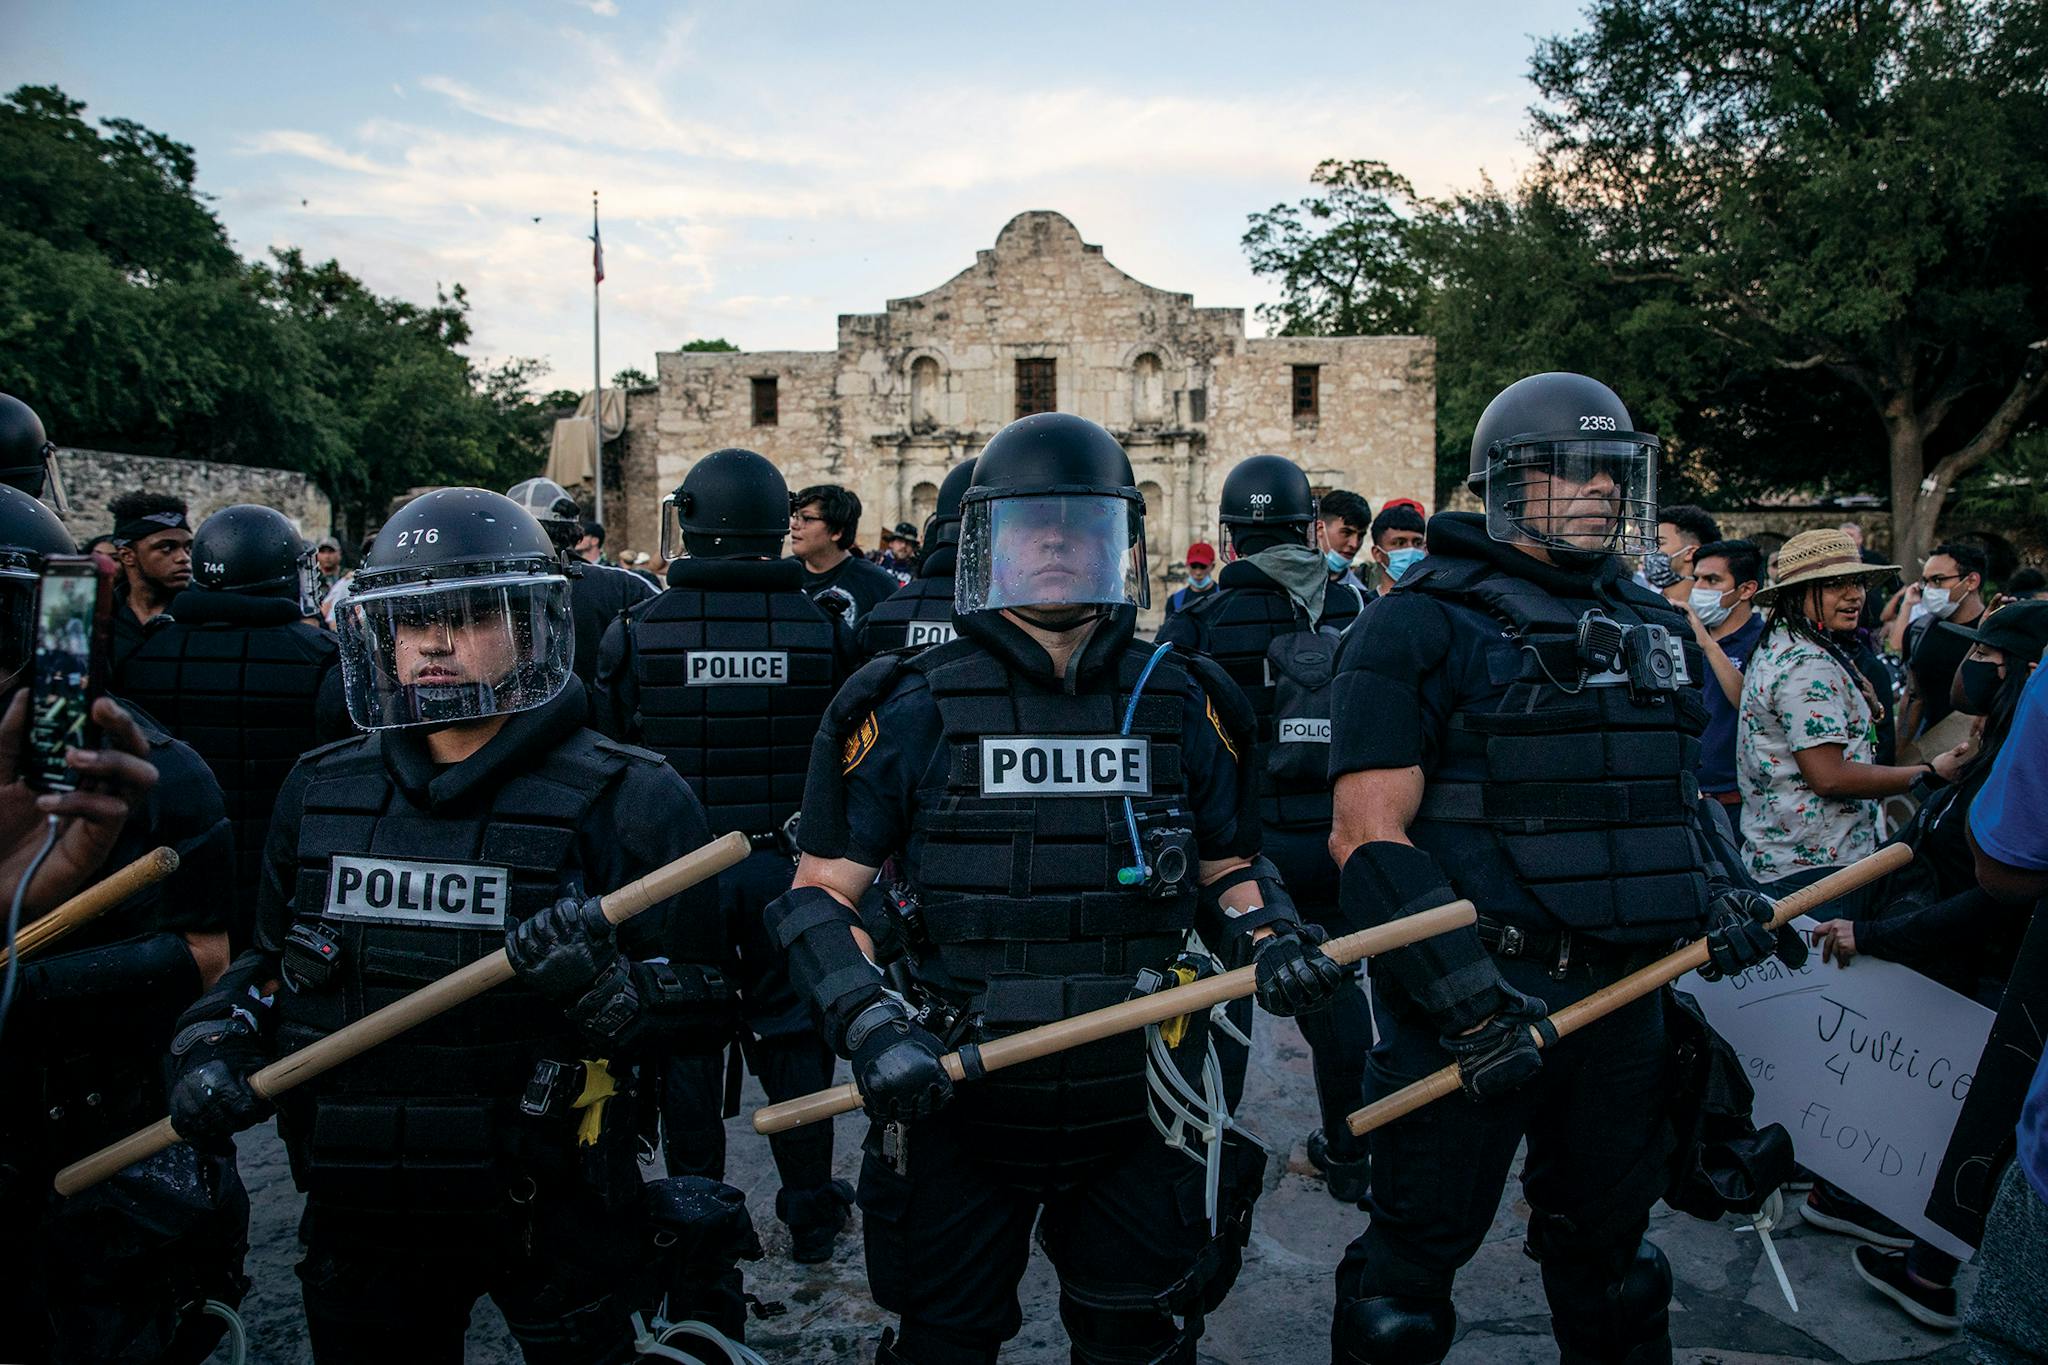 San Antonio Police officers deploy in front of the Alamo in downtown San Antonio on May 30, 2020. People took to the streets of San Antonio to protest the killing of George Floyd in Minnesota just five days earlier.